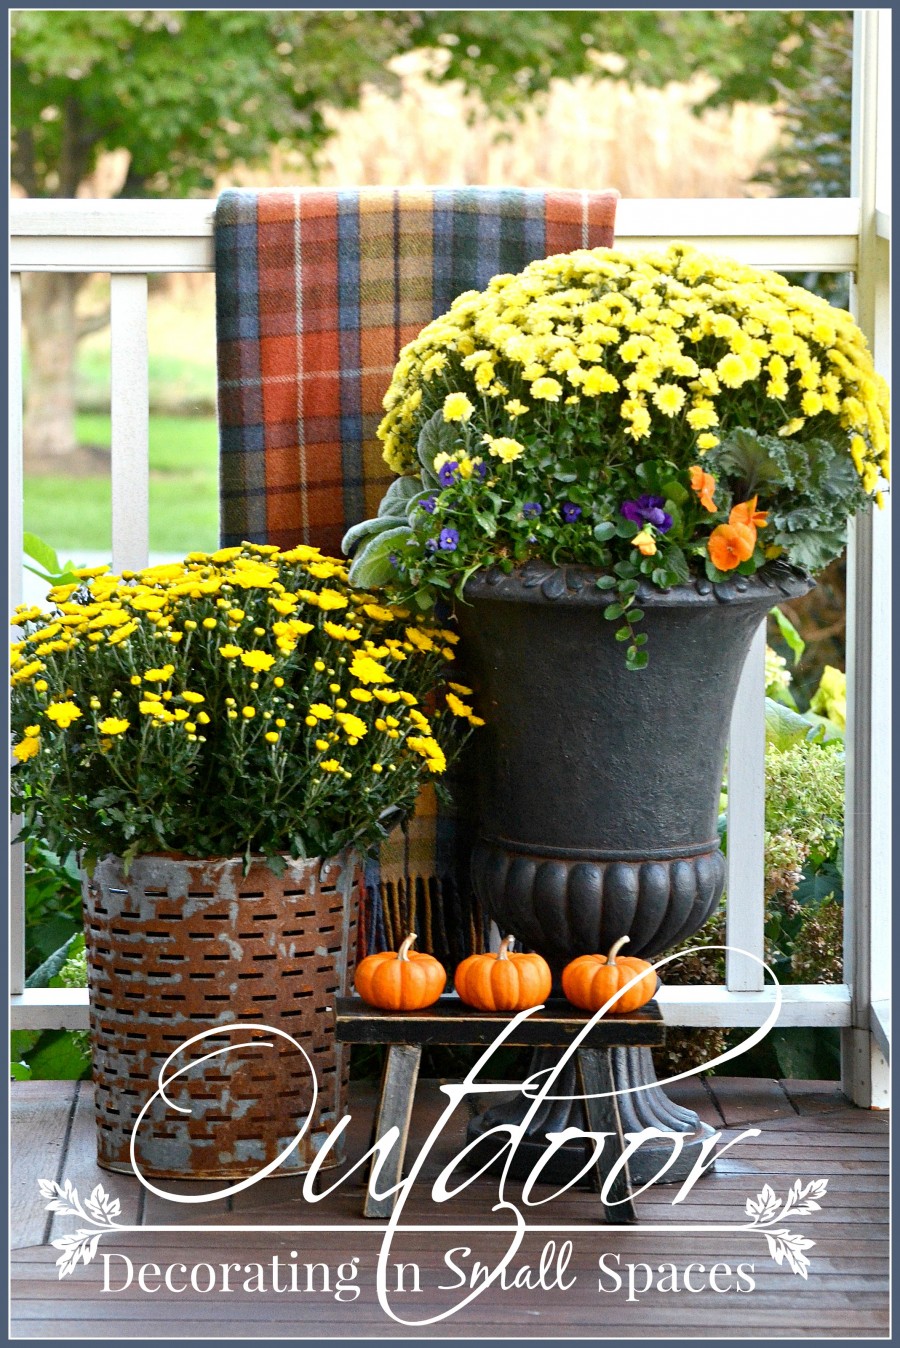 OUTDOOR DECORATING IN SMALL SPACES